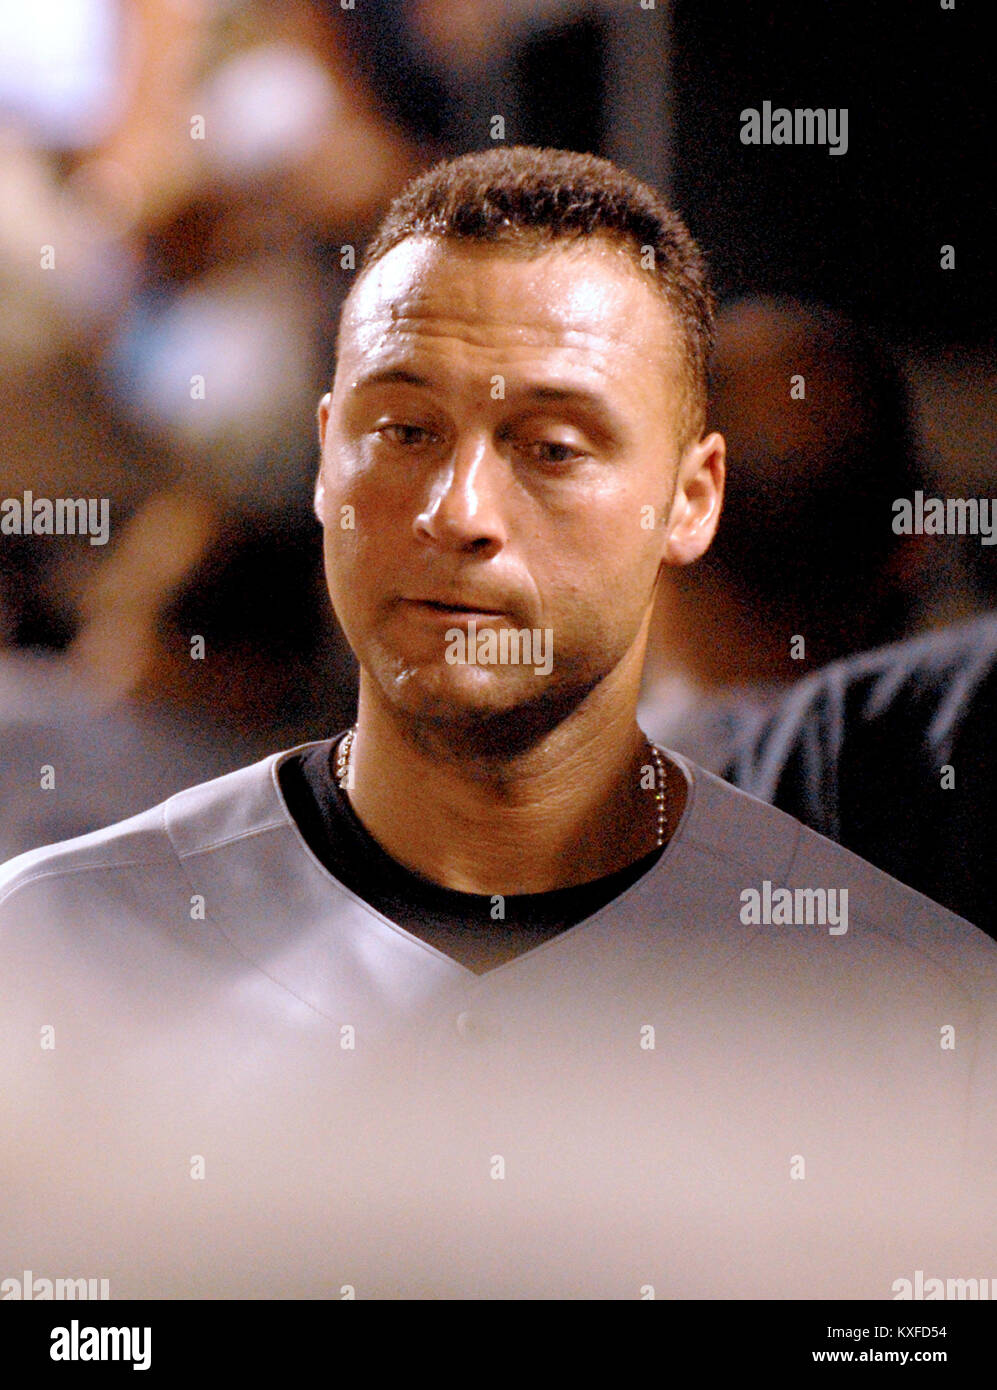 Baltimore, MD - June 27, 2007 -- New York Yankee shortstop Derek Jeter (2) walks through the dugout following his team's 4 - 0 loss to the Baltimore Orioles at Oriole Park at Camden Yards in Baltimore, MD on Wednesday, June 27, 2007.  .Credit: Ron Sachs / CNP./MediaPunch (RESTRICTION: NO New York or New Jersey Newspapers or newspapers within a 75 mile radius of New York City) Stock Photo